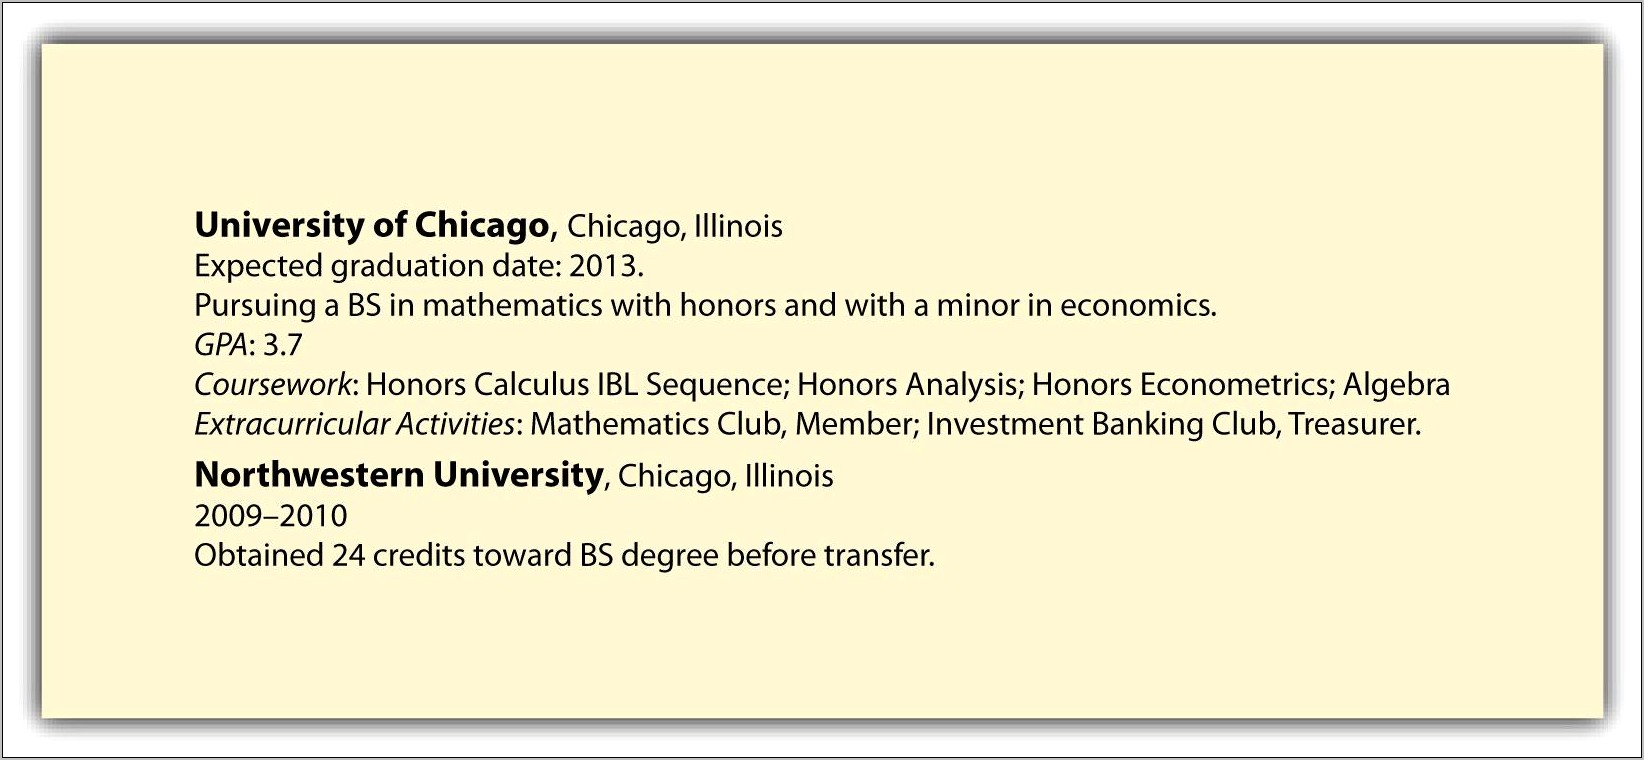 Resume Sample Education Section High School